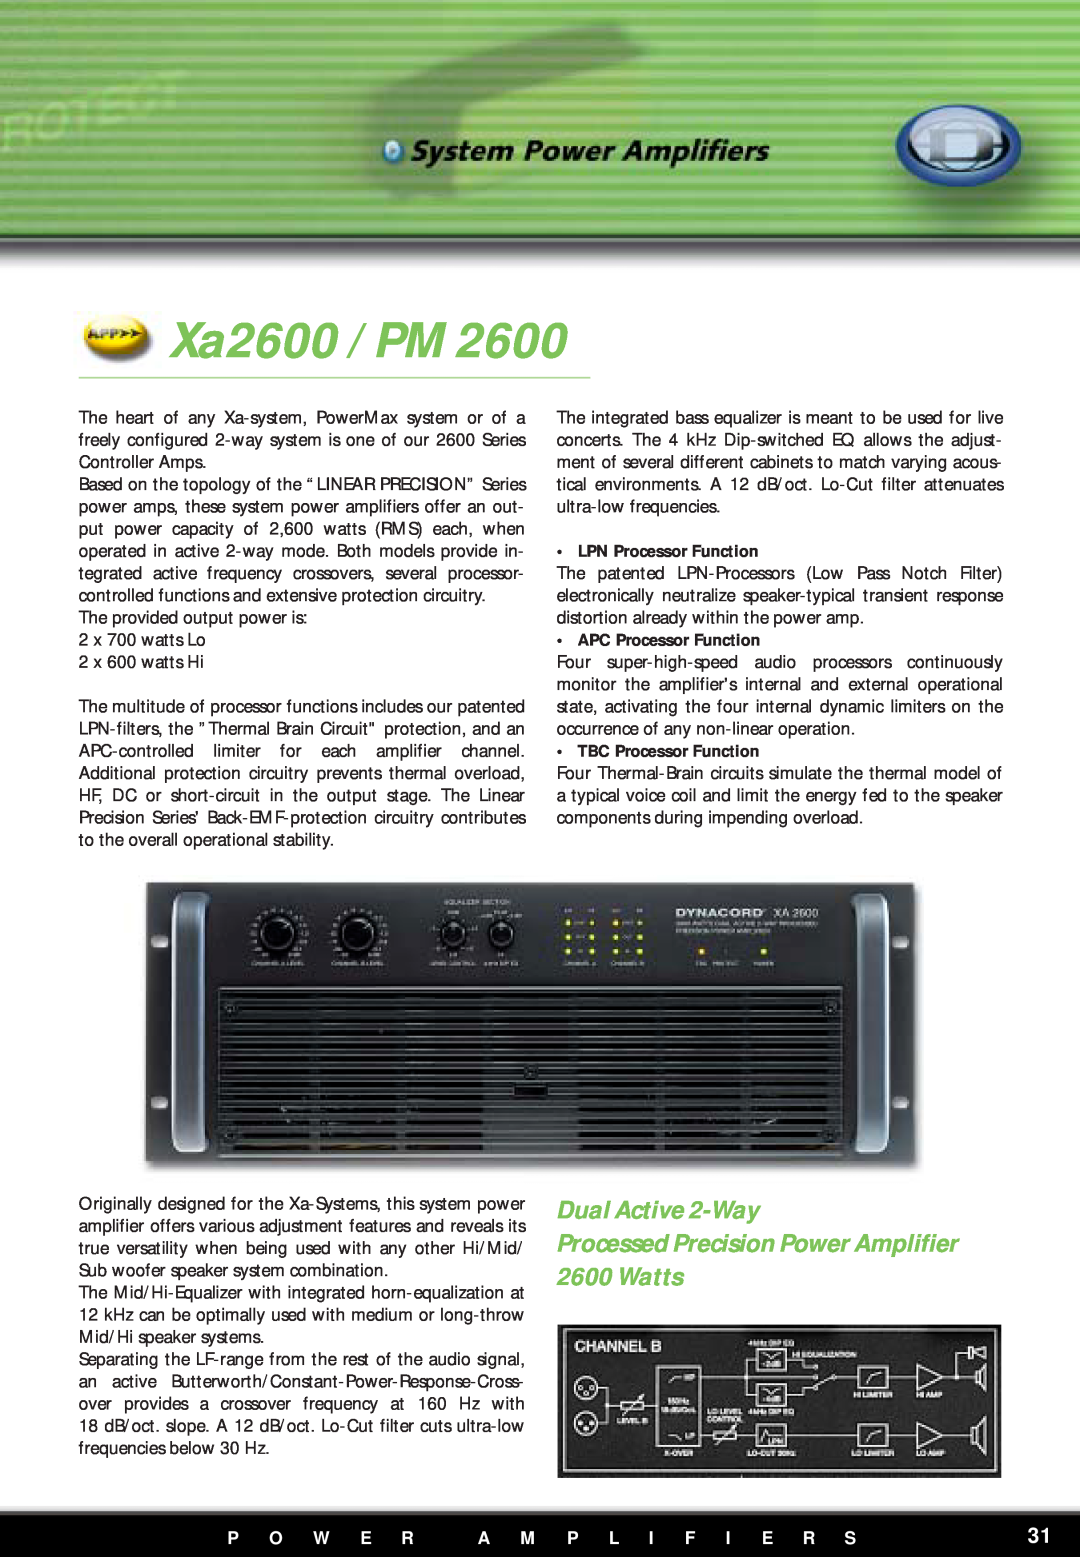 Dynacord PM2600 manual Xa2600 / PM, Dual Active 2-Way, Processed Precision Power Amplifier 2600 Watts, P O W E R 